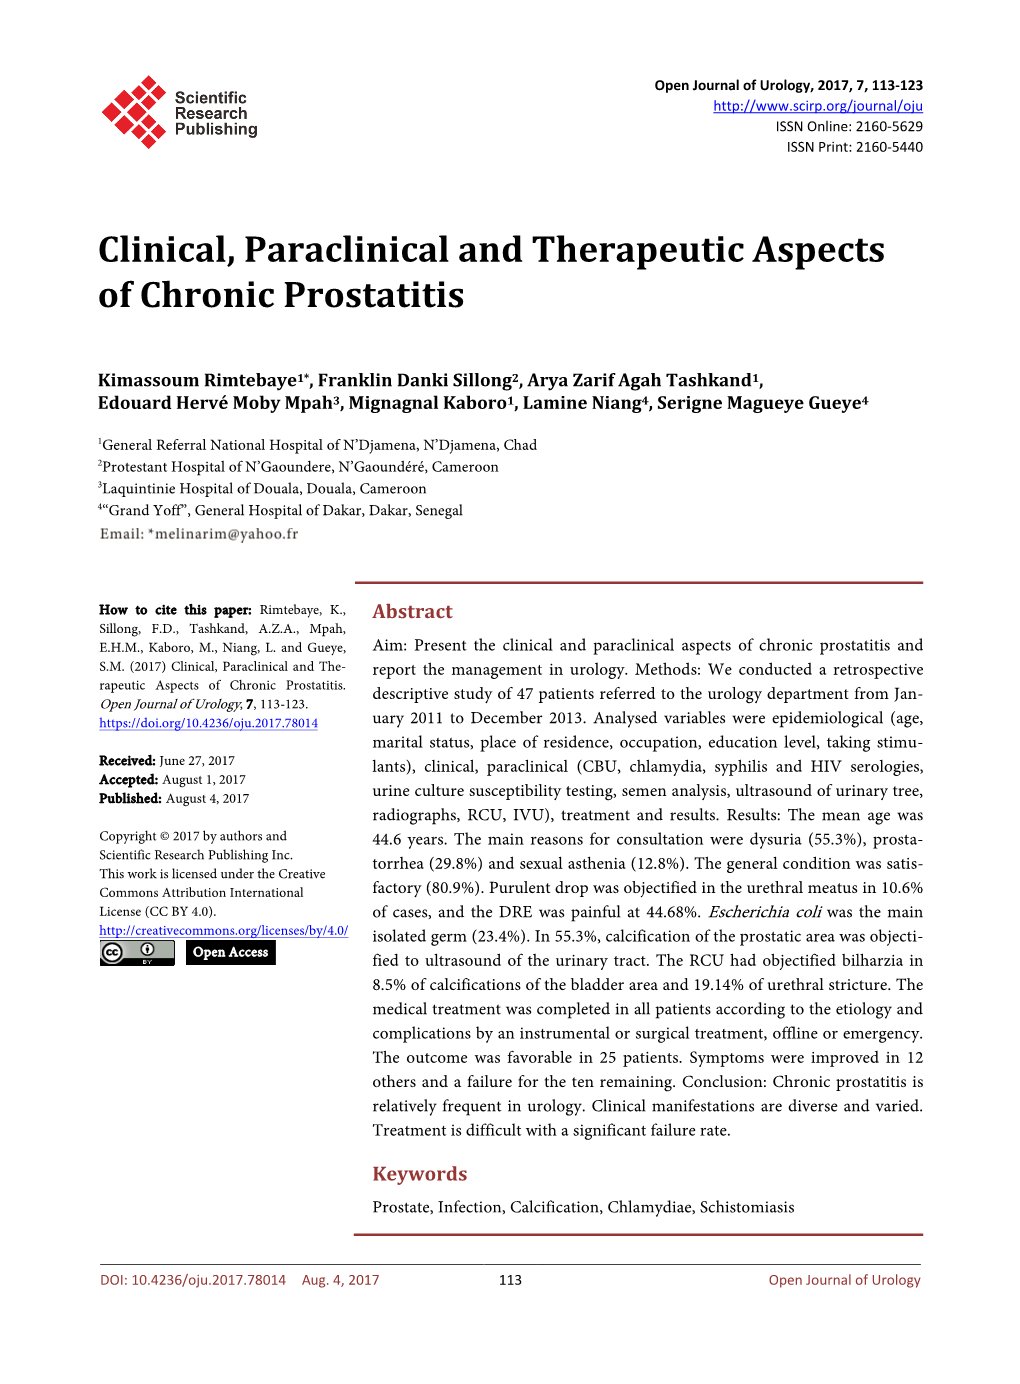 Clinical, Paraclinical and Therapeutic Aspects of Chronic Prostatitis